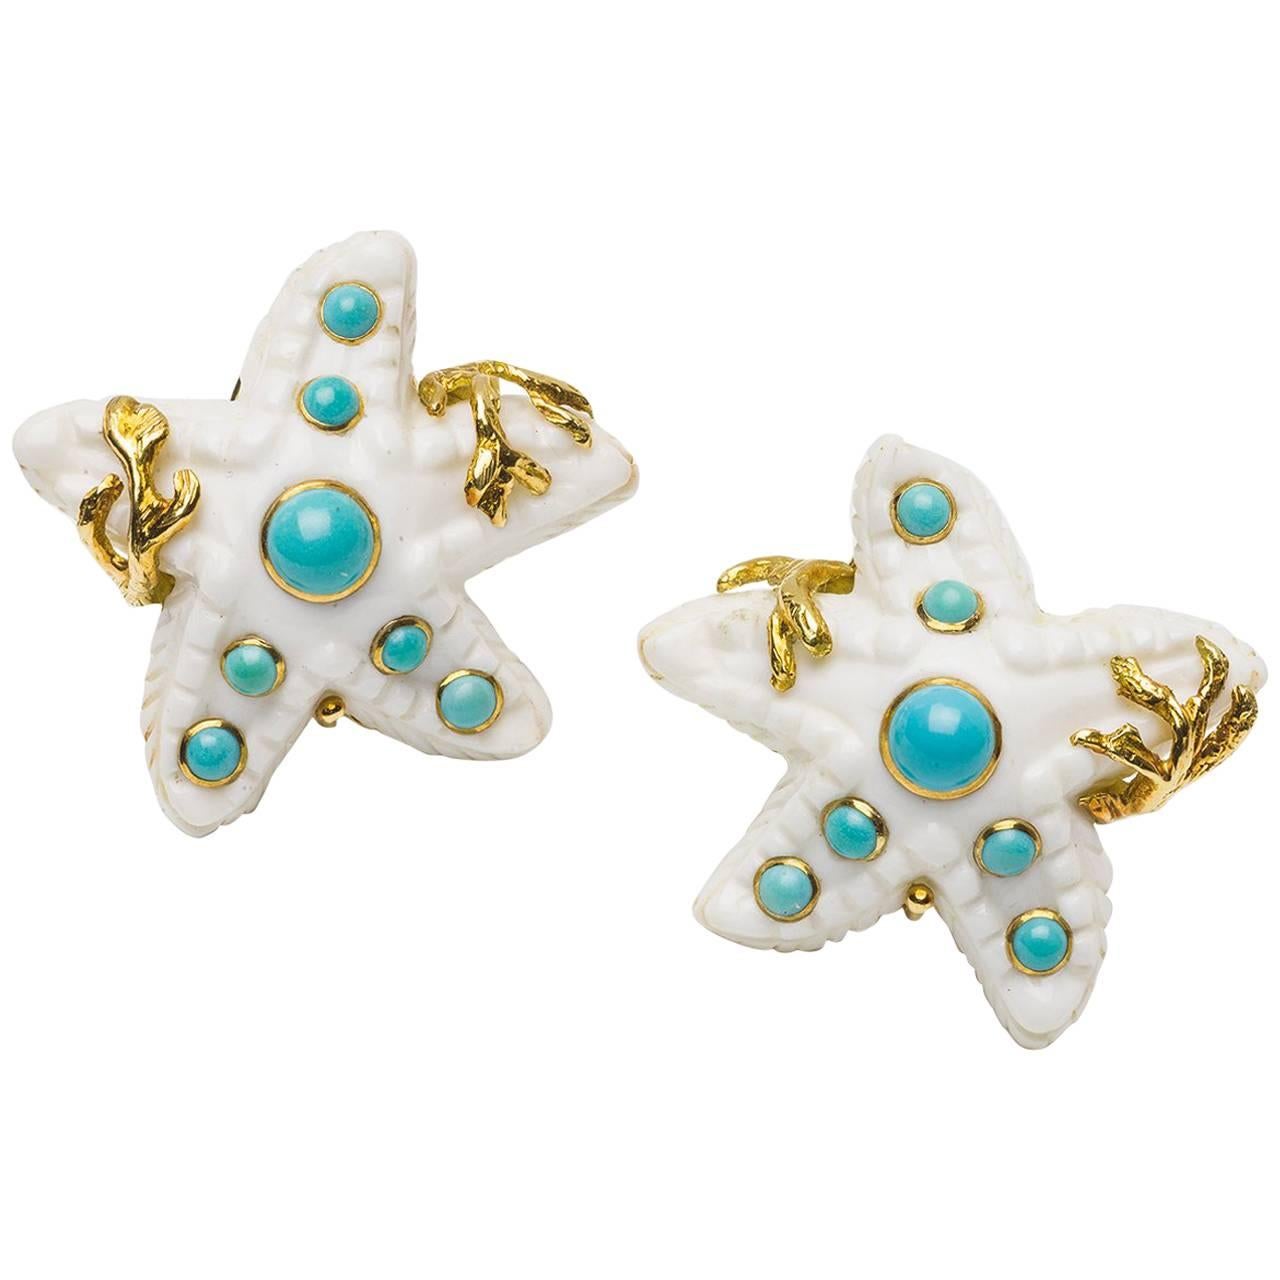 Seaman Schepps Carved Coral and Turquoise Starfish Earclips